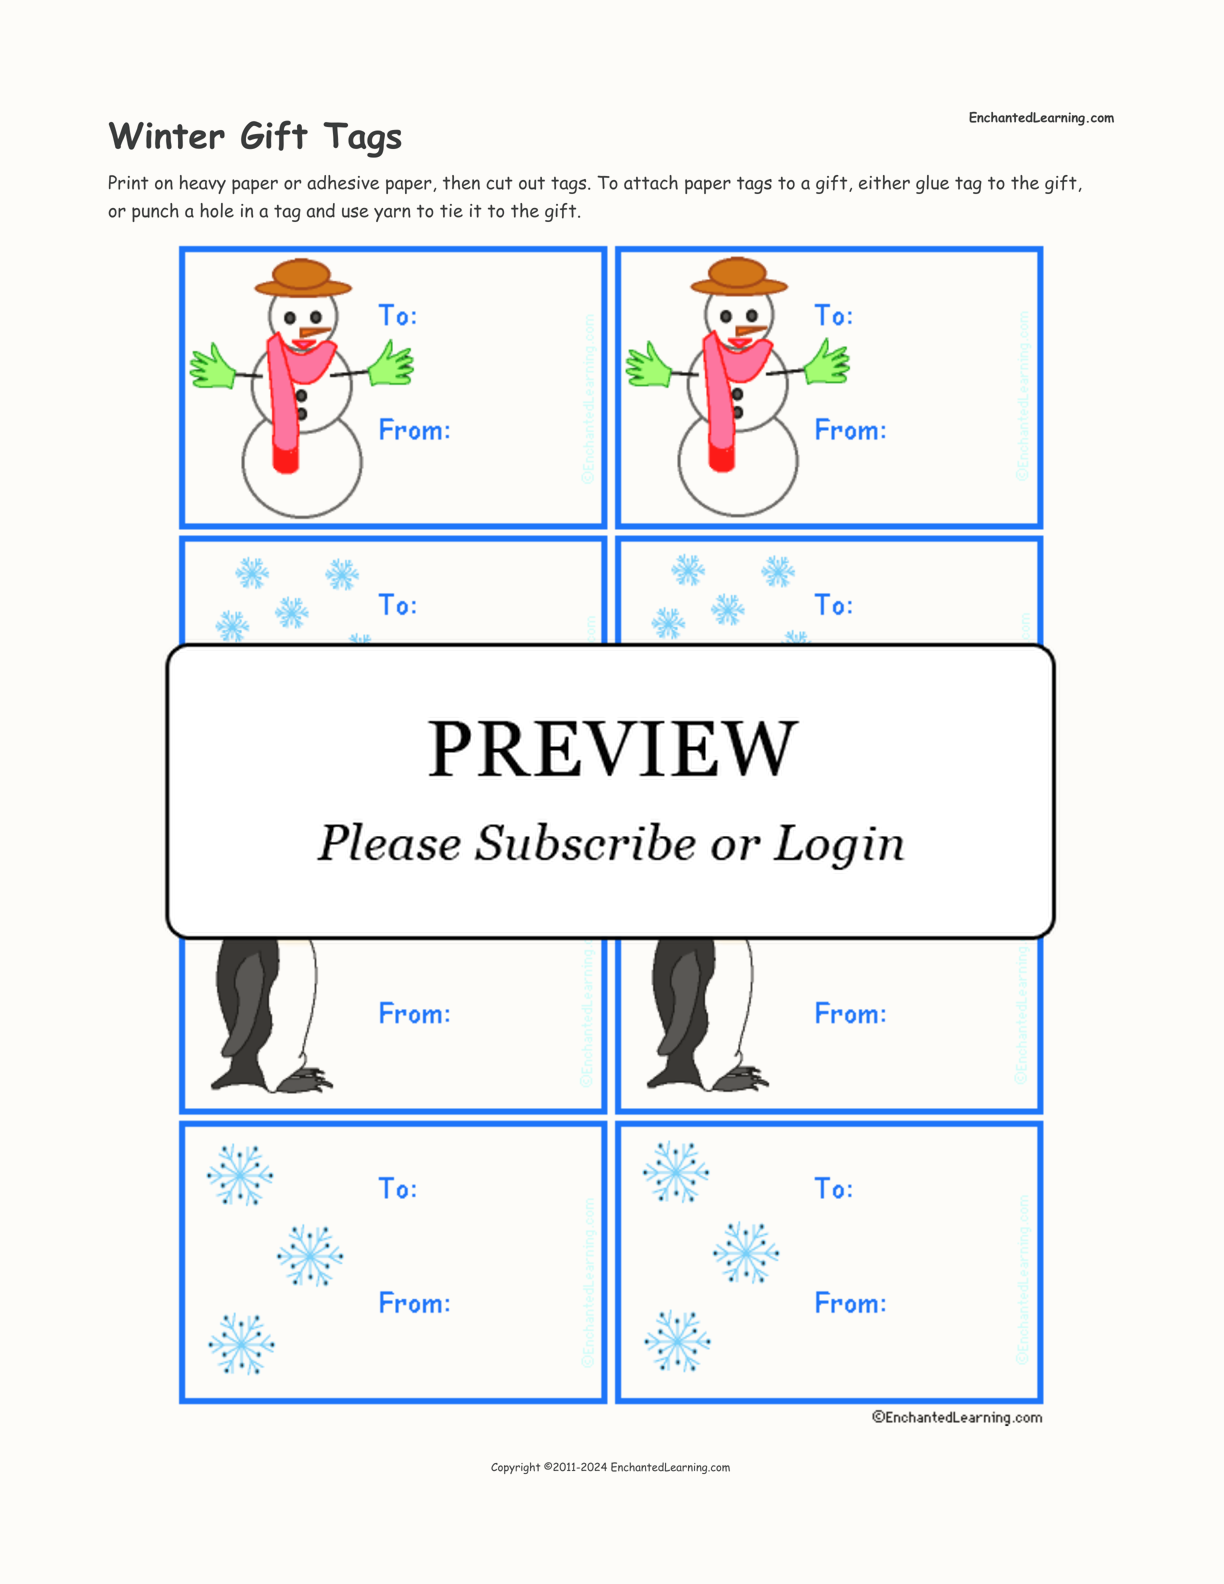 Winter Gift Tags interactive printout page 1